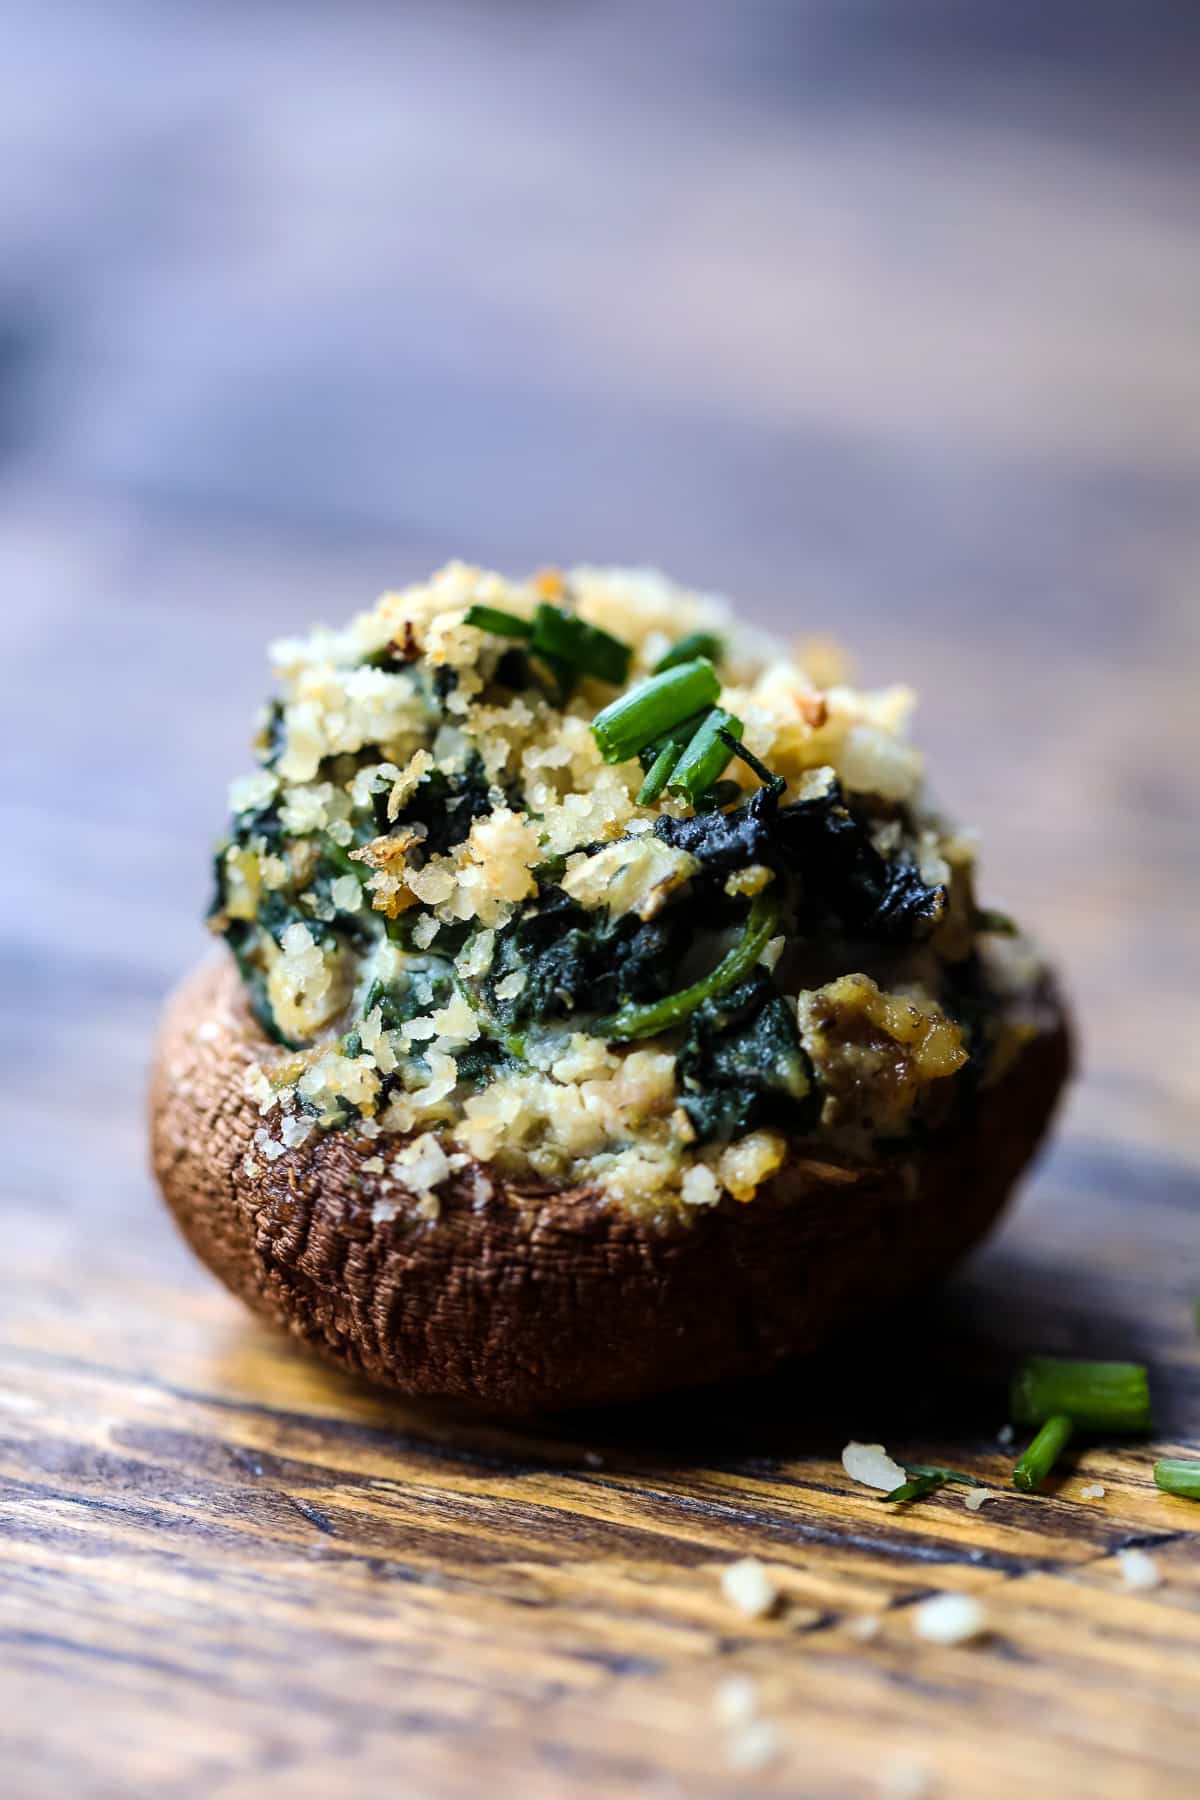 A Closeup of a Vegan Stuffed Mushroom with Spinach and Ricotta.